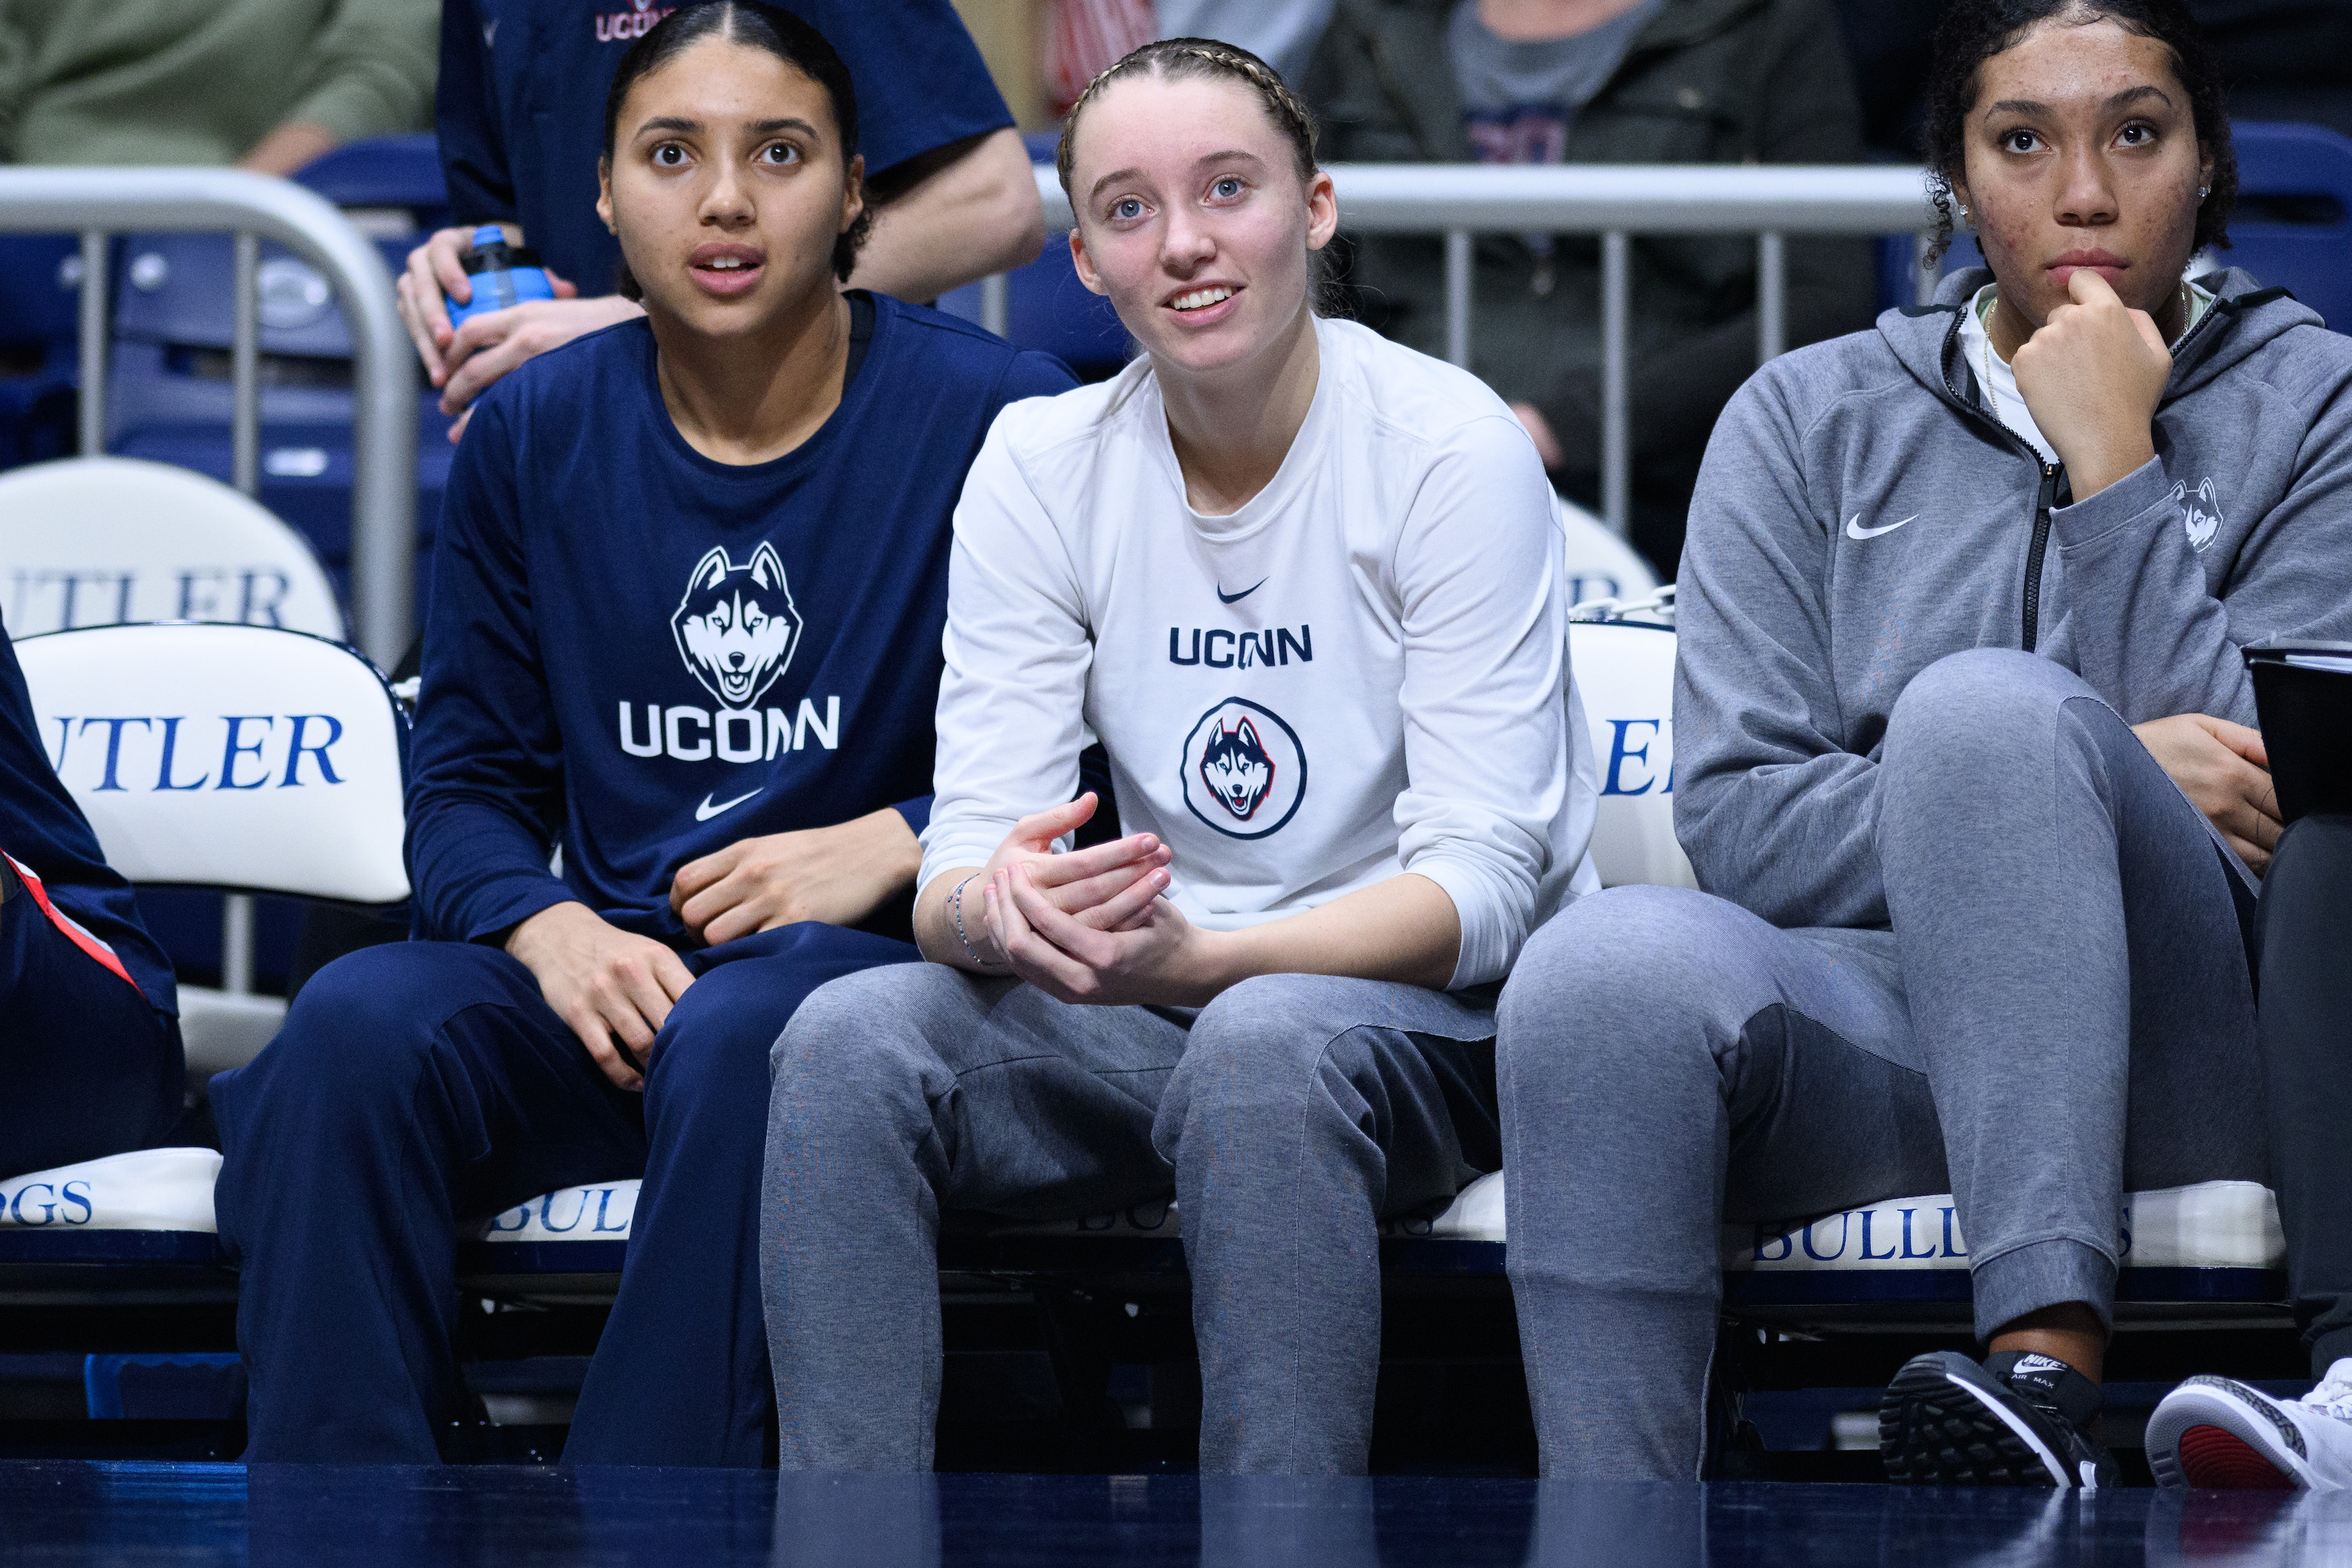 UConn Huskies guard Paige Bueckers (5) on the sidelines during the women's college basketball game between the Butler Bulldogs and UConn Huskies on January 3, 2023, at Hinkle Fieldhouse in Indianapolis, IN.